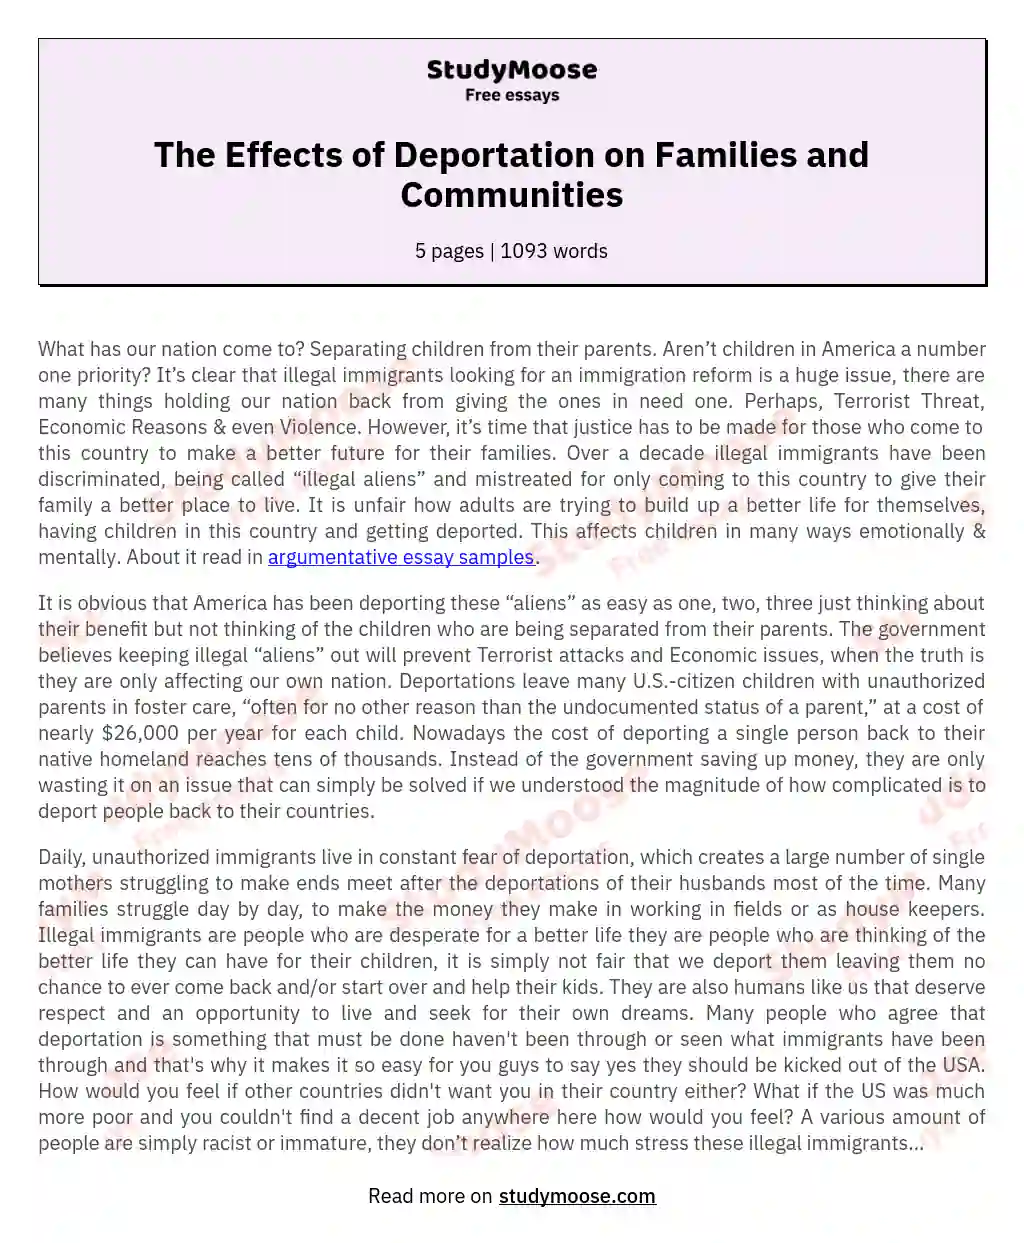 The Effects of Deportation on Families and Communities essay